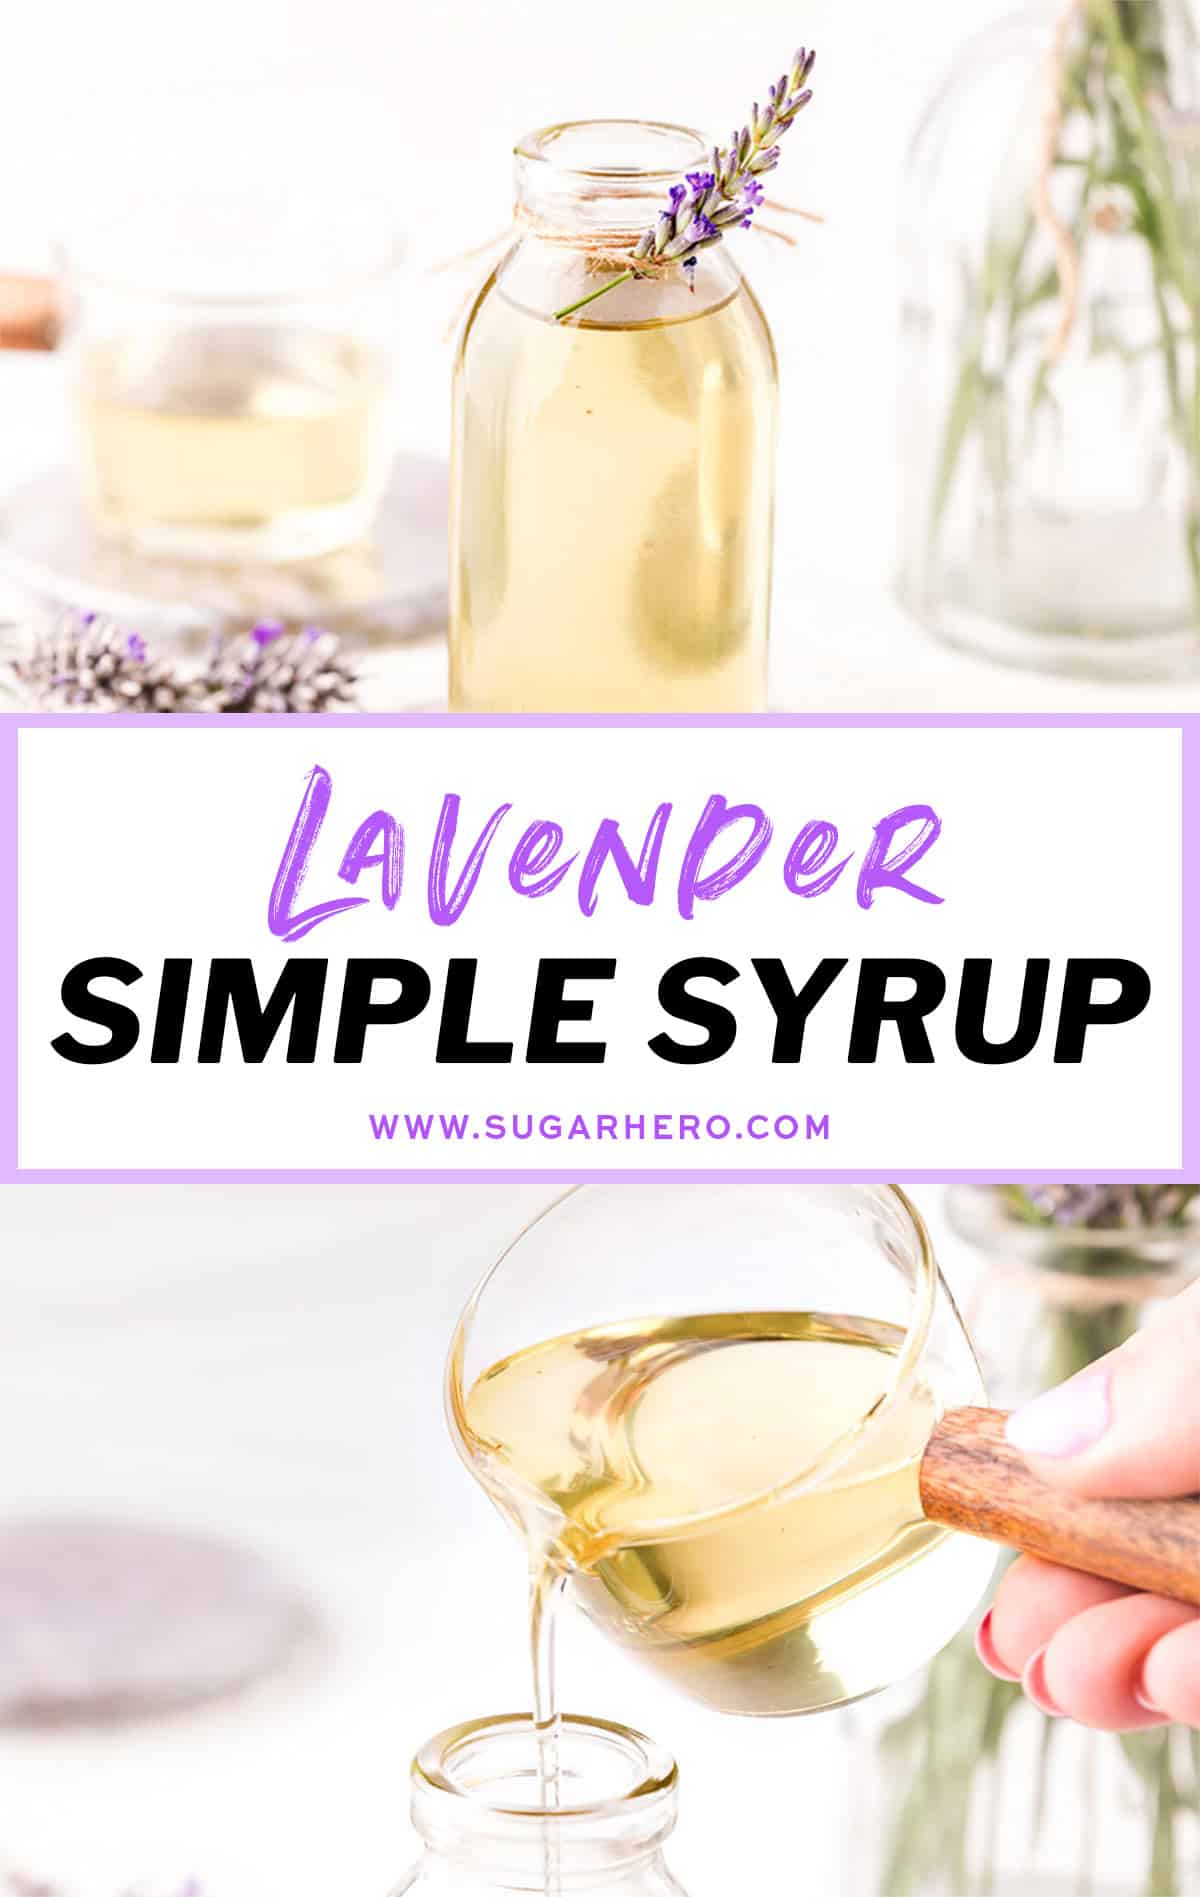 Two photo collage of Lavender Simple Syrup with text overlay for Pinterest.